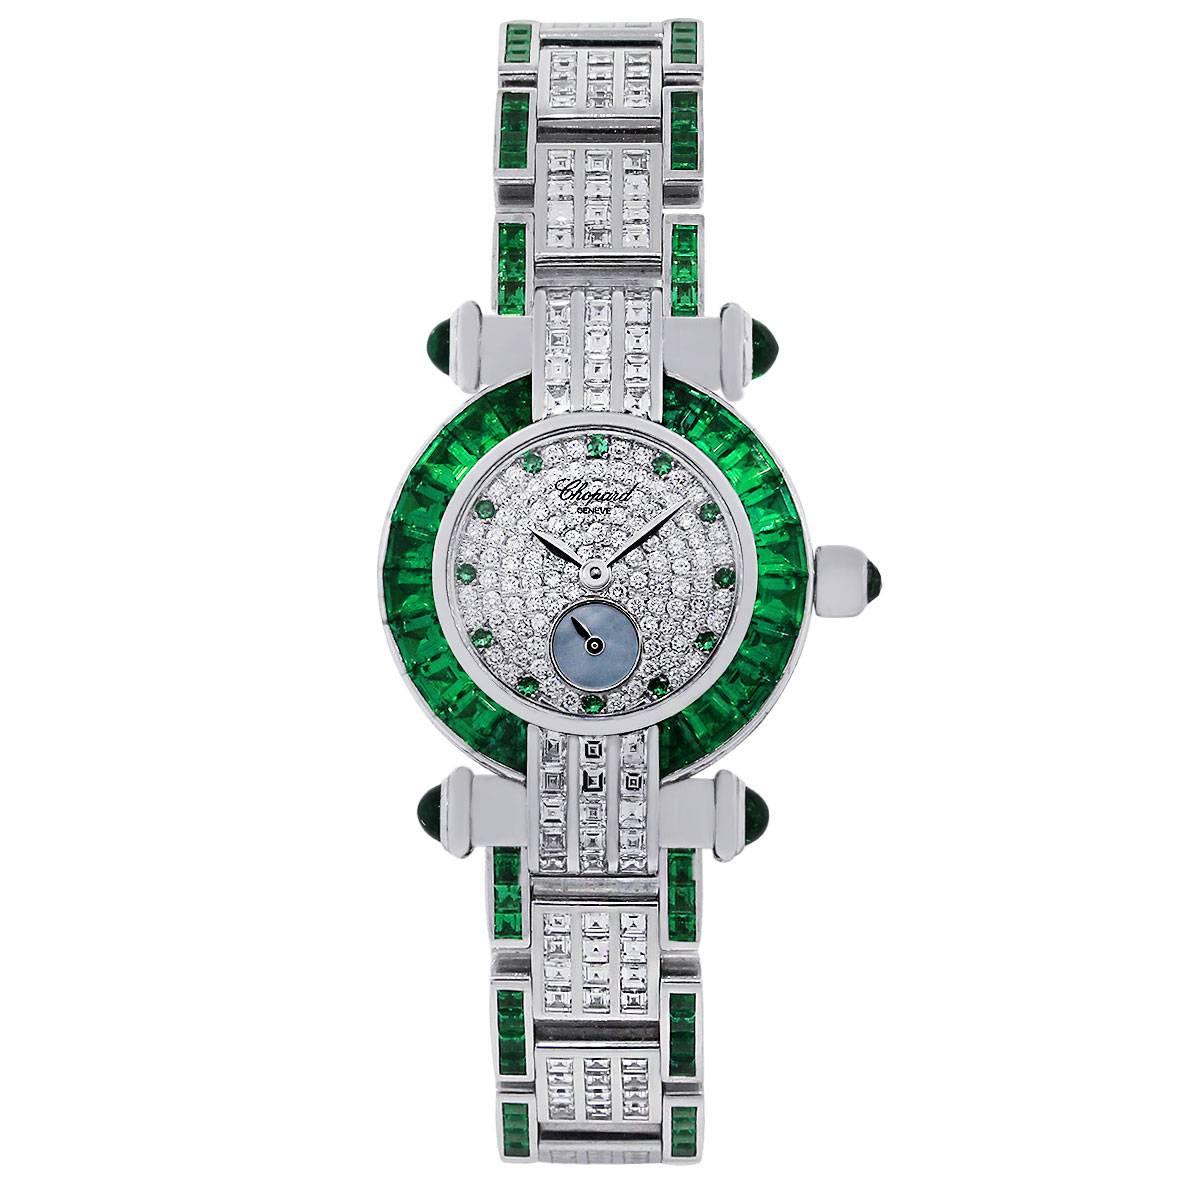 Brand: Chopard
MPN: 393234-22
Model: Imperiale
Case Material: 18k white gold
Case Diameter: 26mm
Crystal: Scratch resistant sapphire
Bezel: 18k white gold emerald gemstone bezel
Diamond Details: Diamonds are Colorless and VS in calrity
Dial: